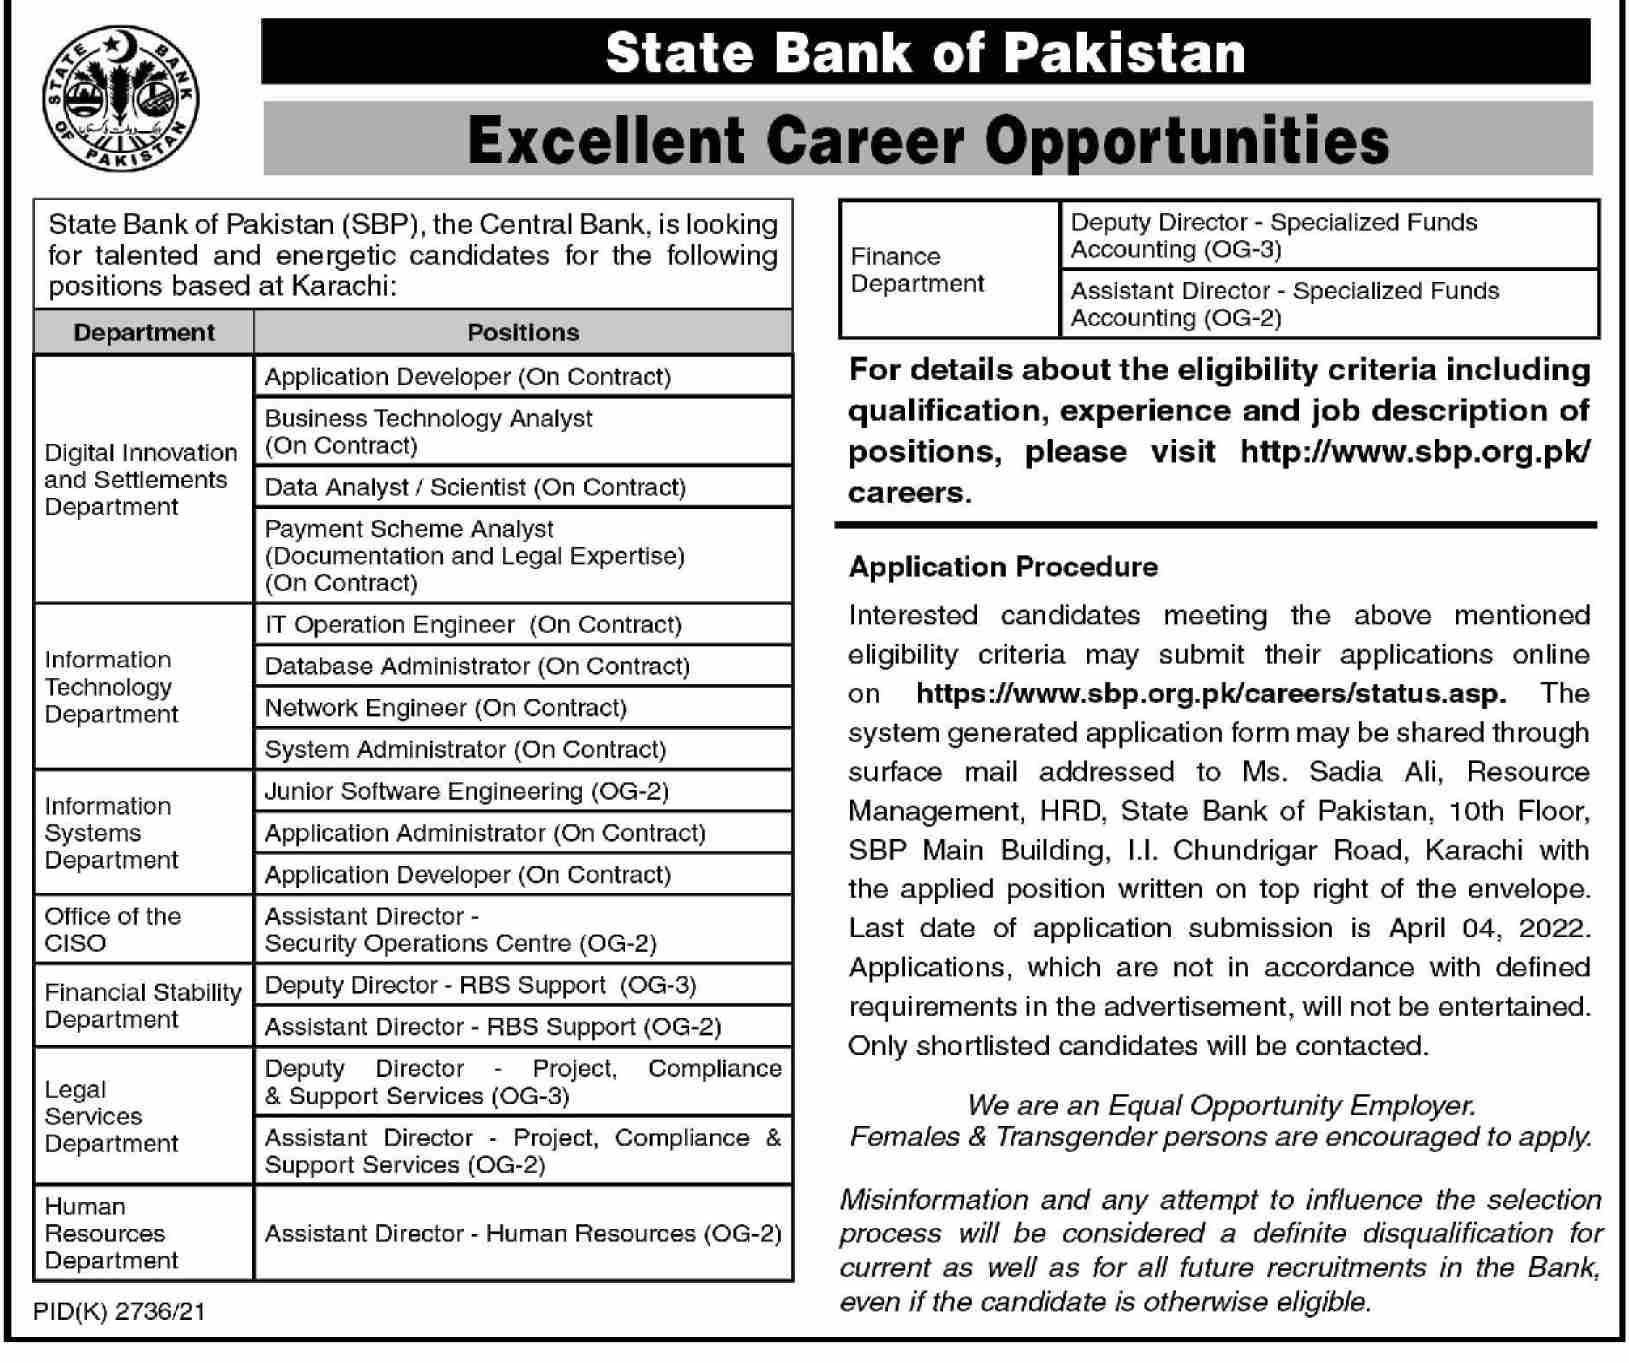 Career Opportunities At State Bank of Pakistan